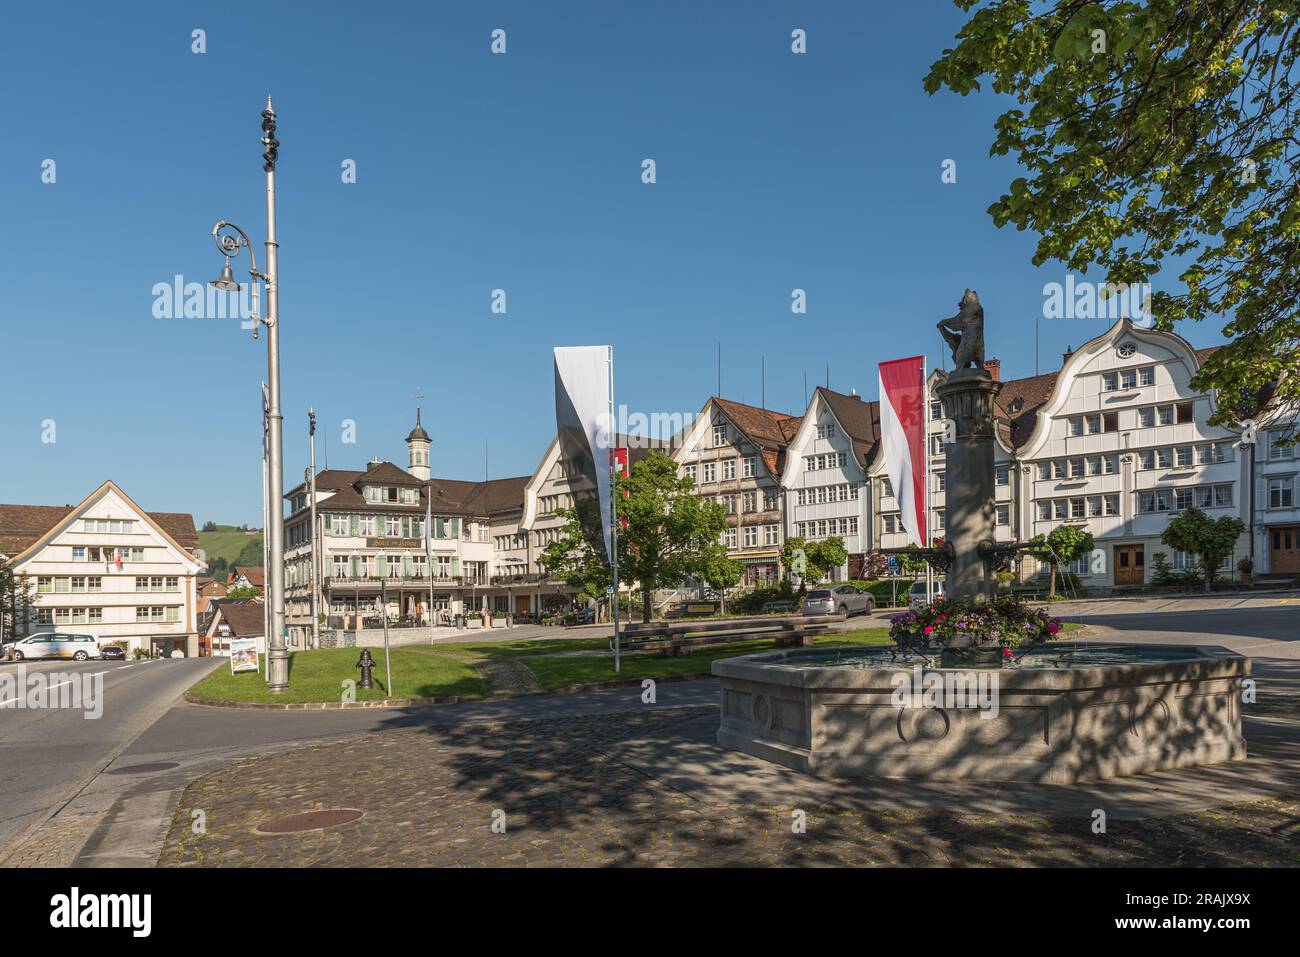 Village square with fountain and traditional Appenzell wooden houses with curved gables, Gais, Appenzell Ausserrhoden, Switzerland Stock Photo